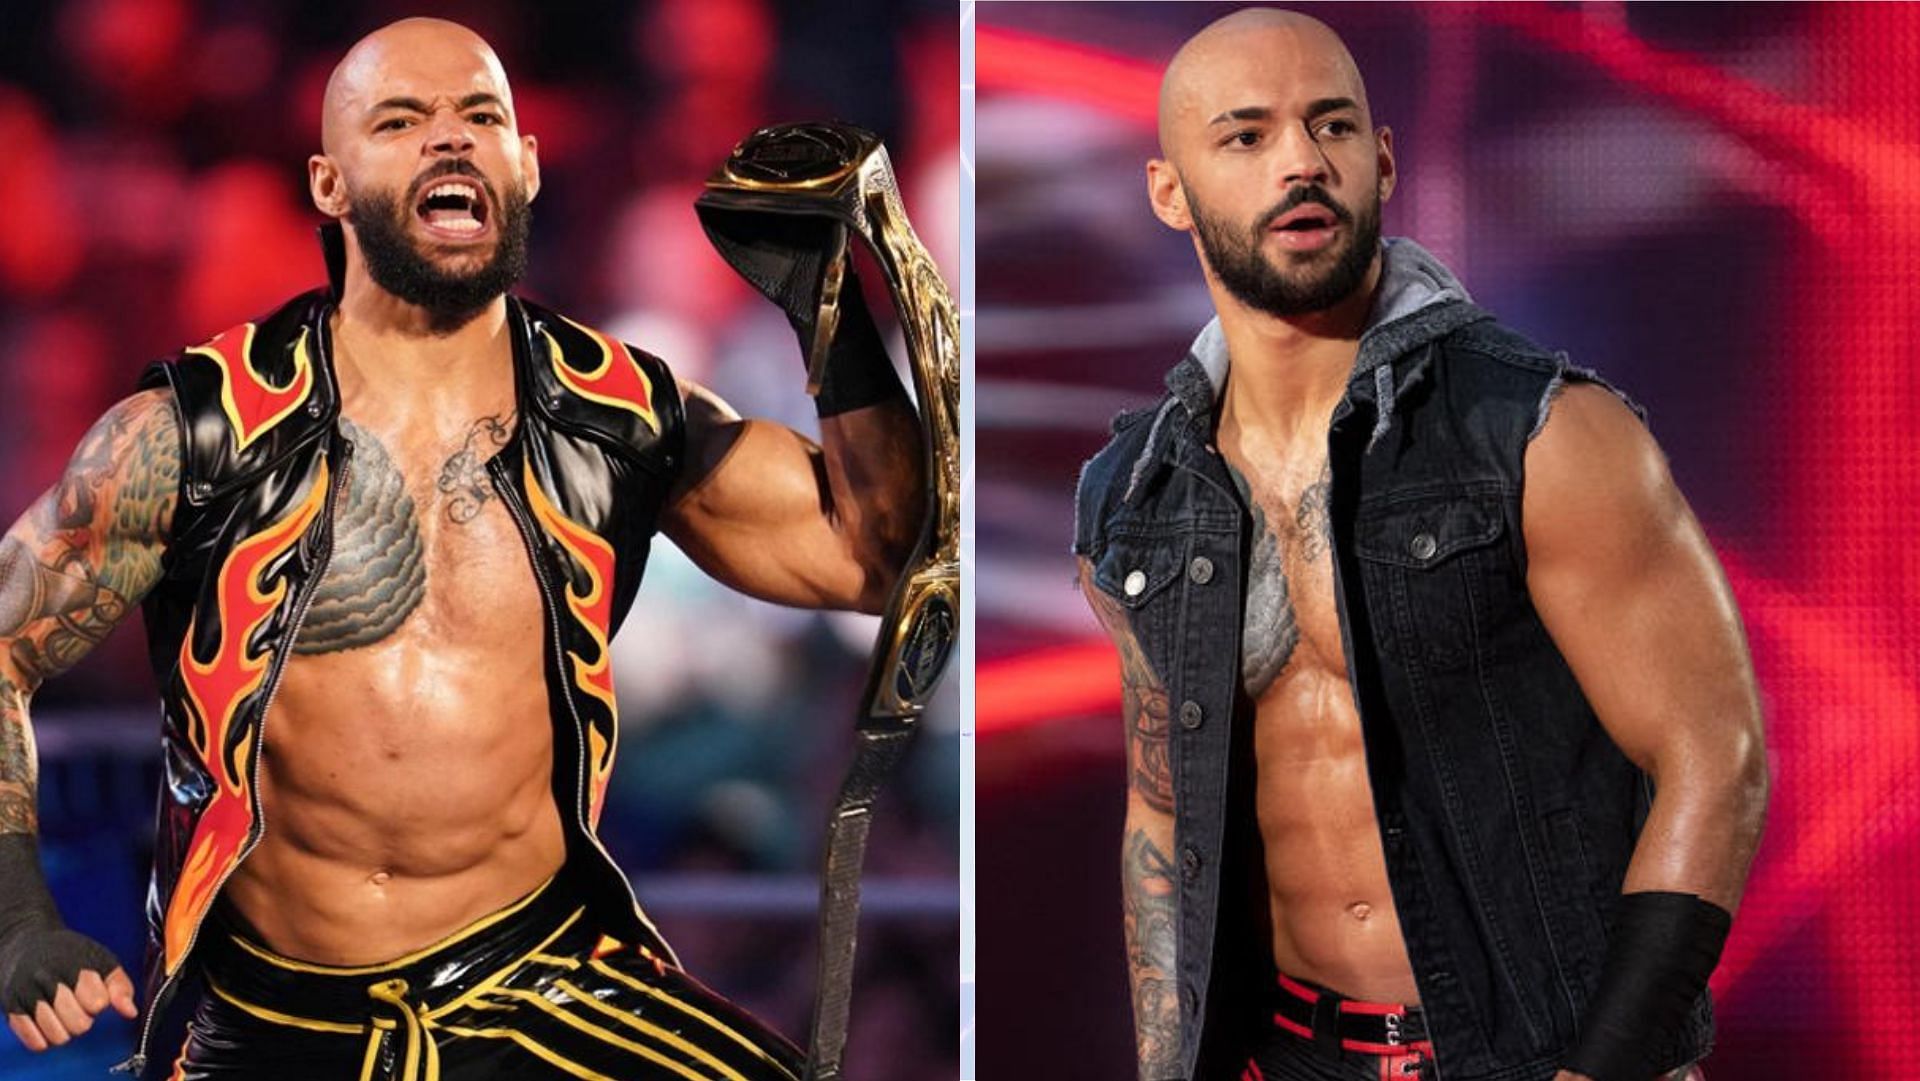 Ricochet made his WWE debut with WWE NXT.